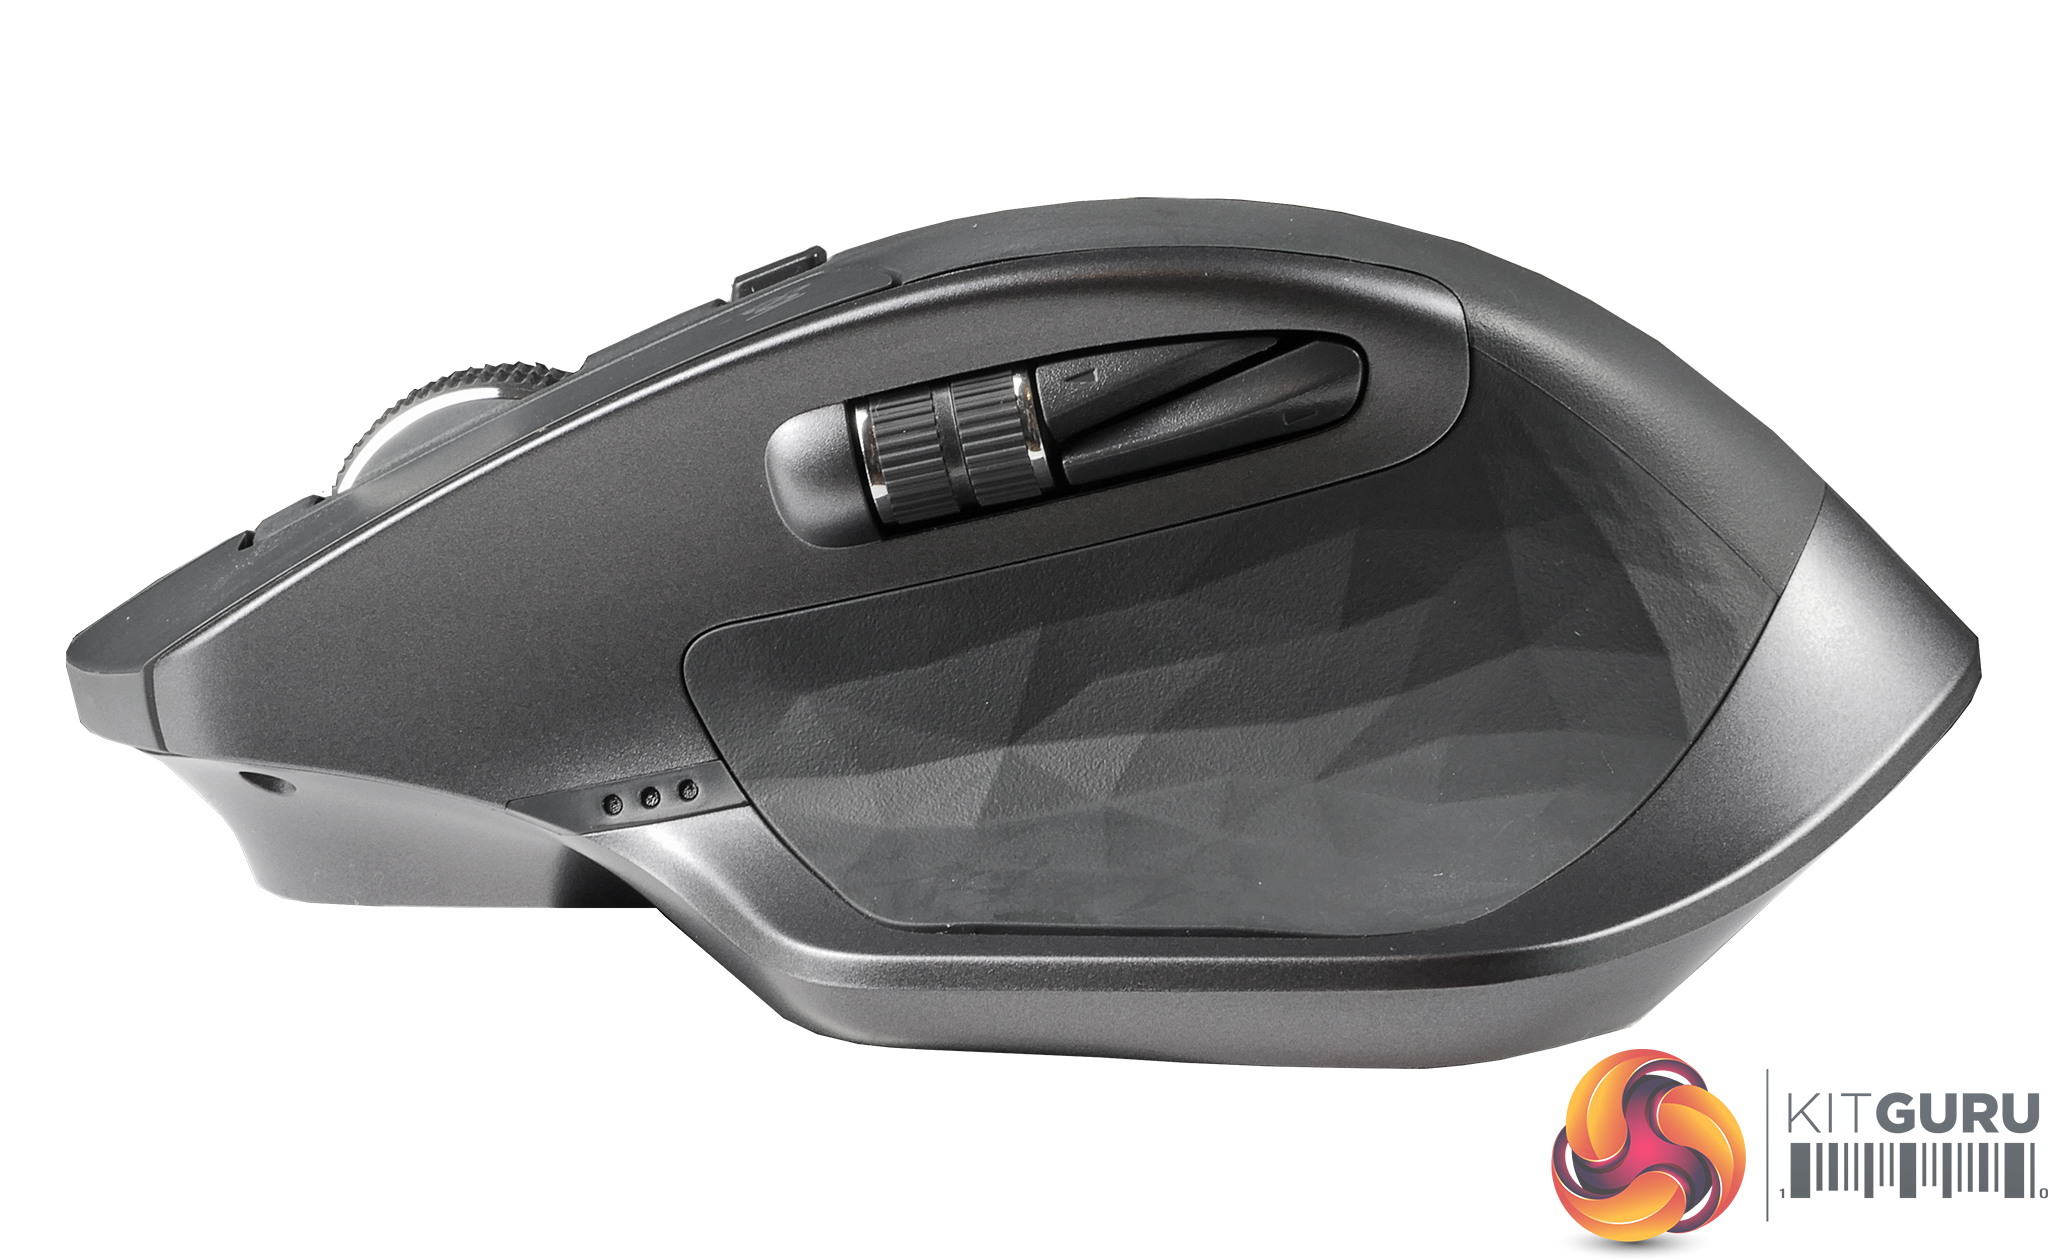 Logitech MX Master Wireless Mouse Review |